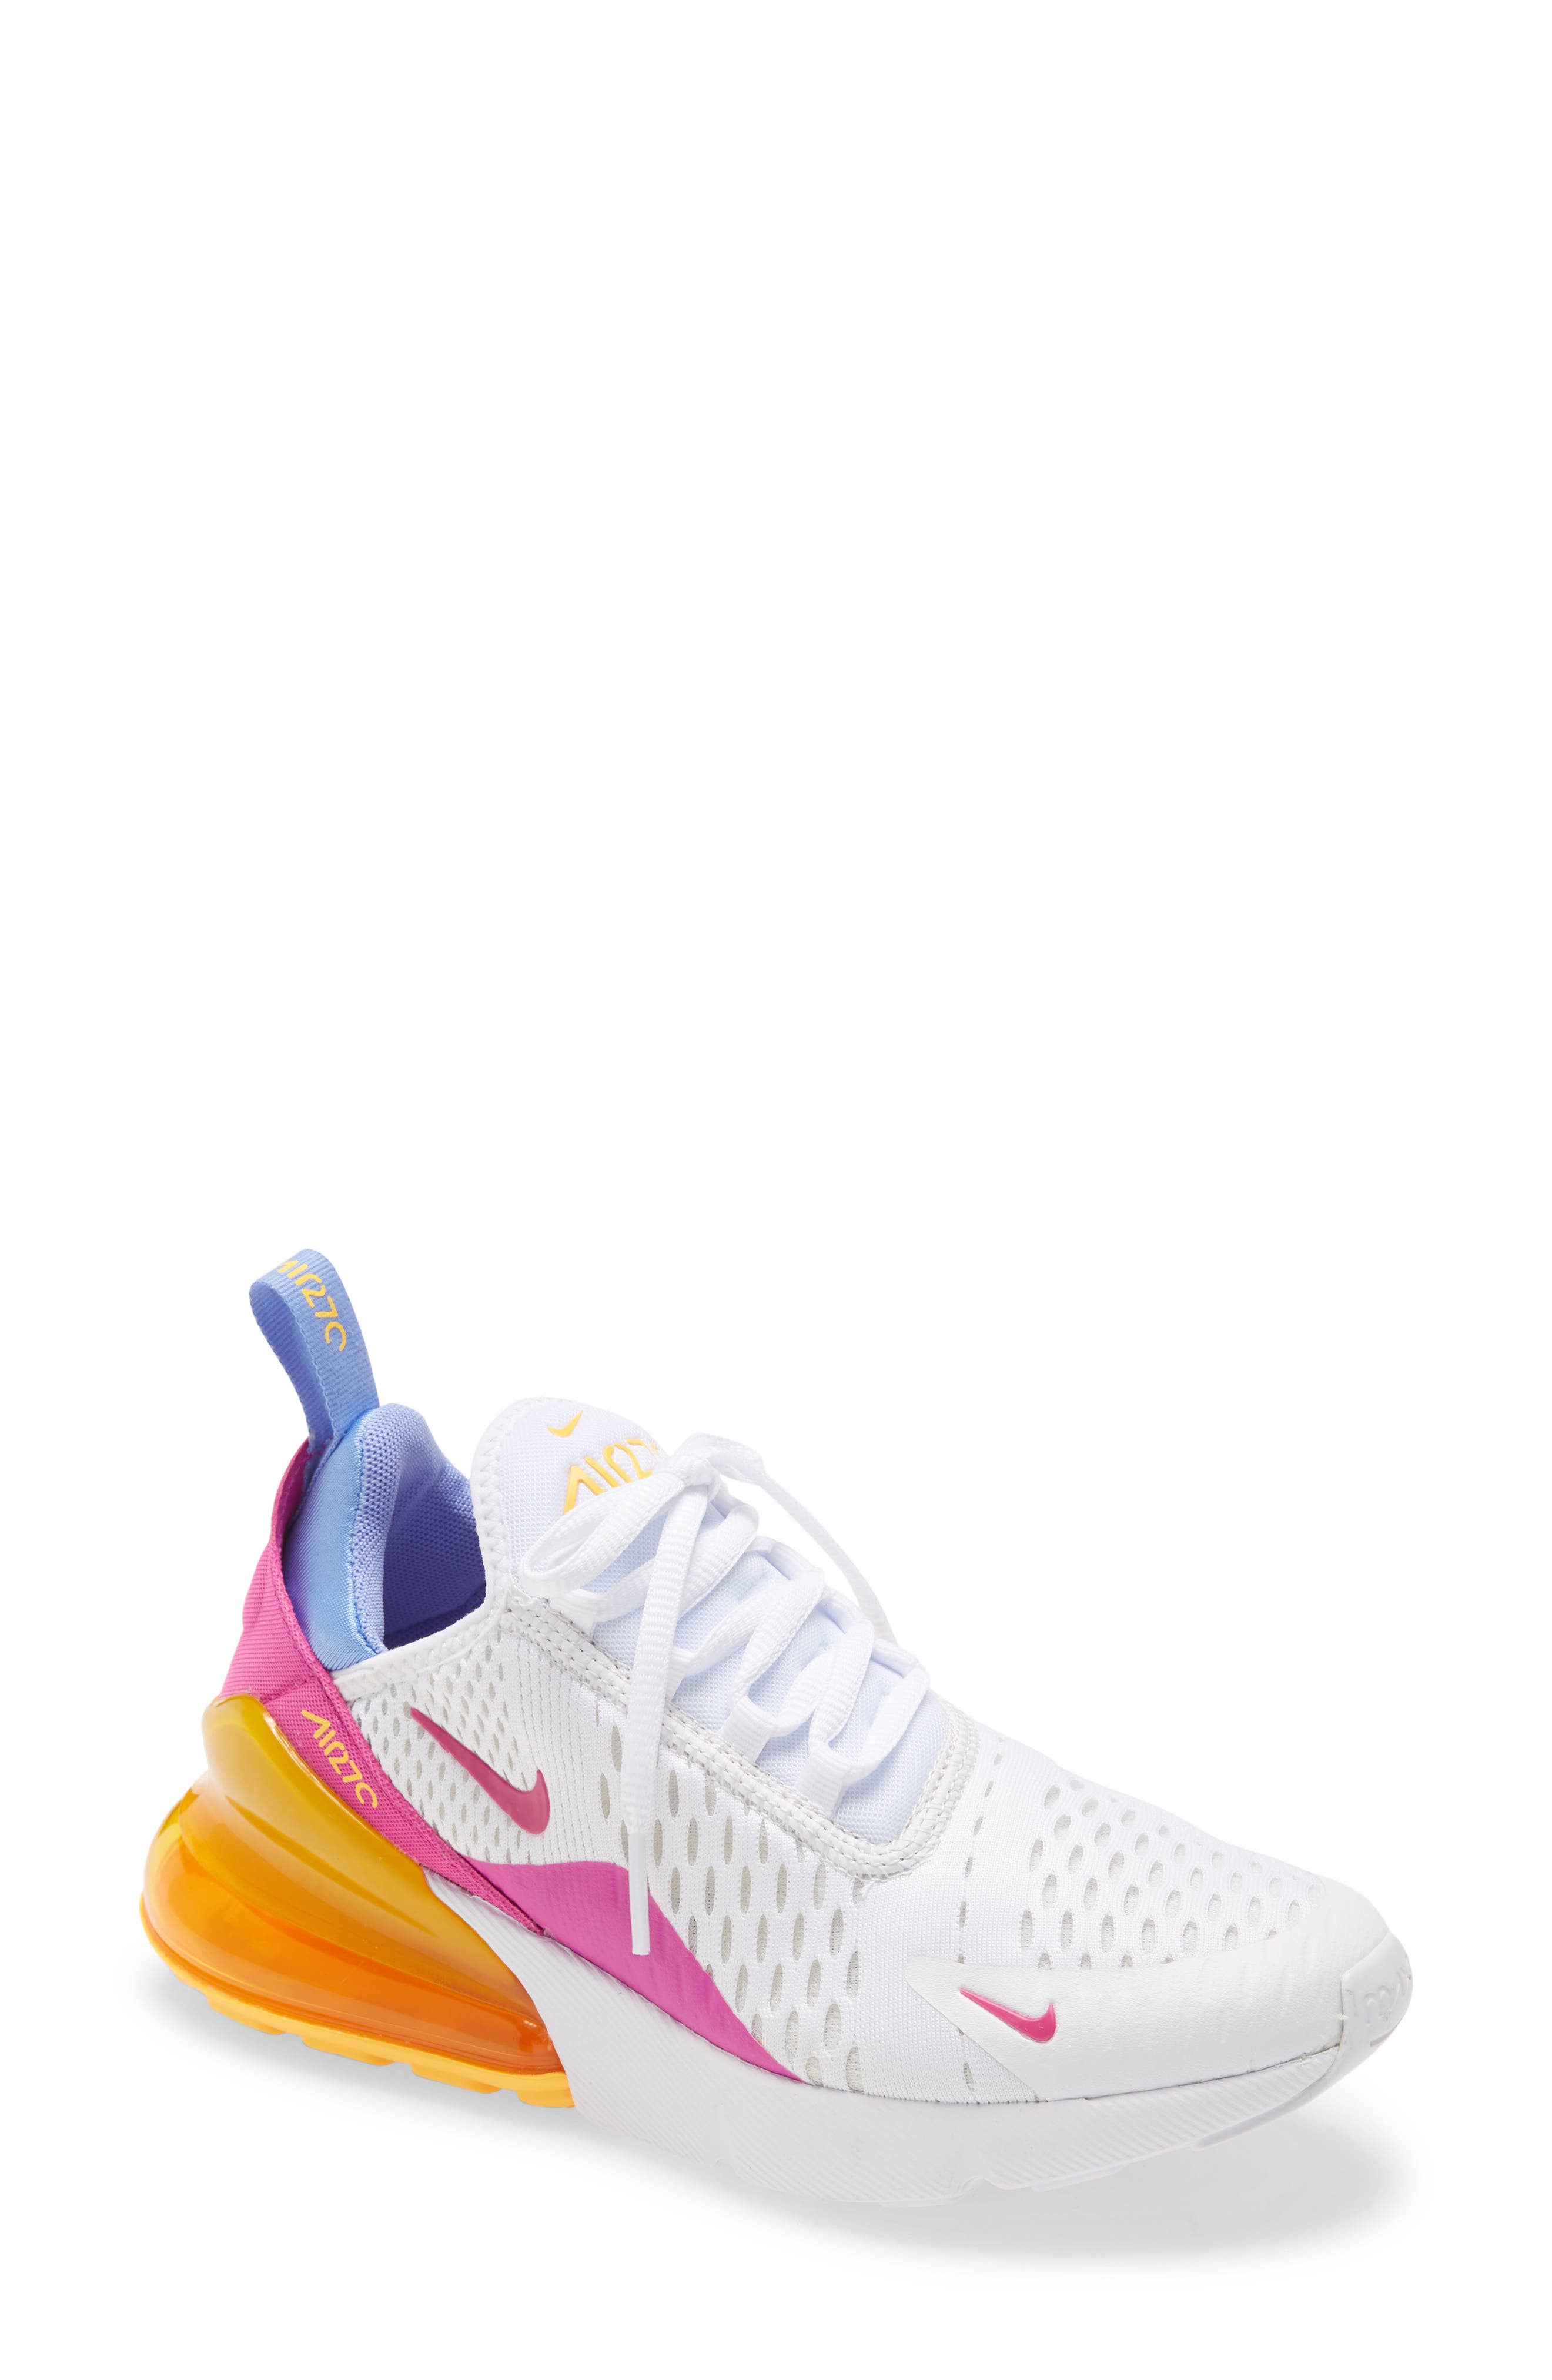 pink and yellow nike women's shoes